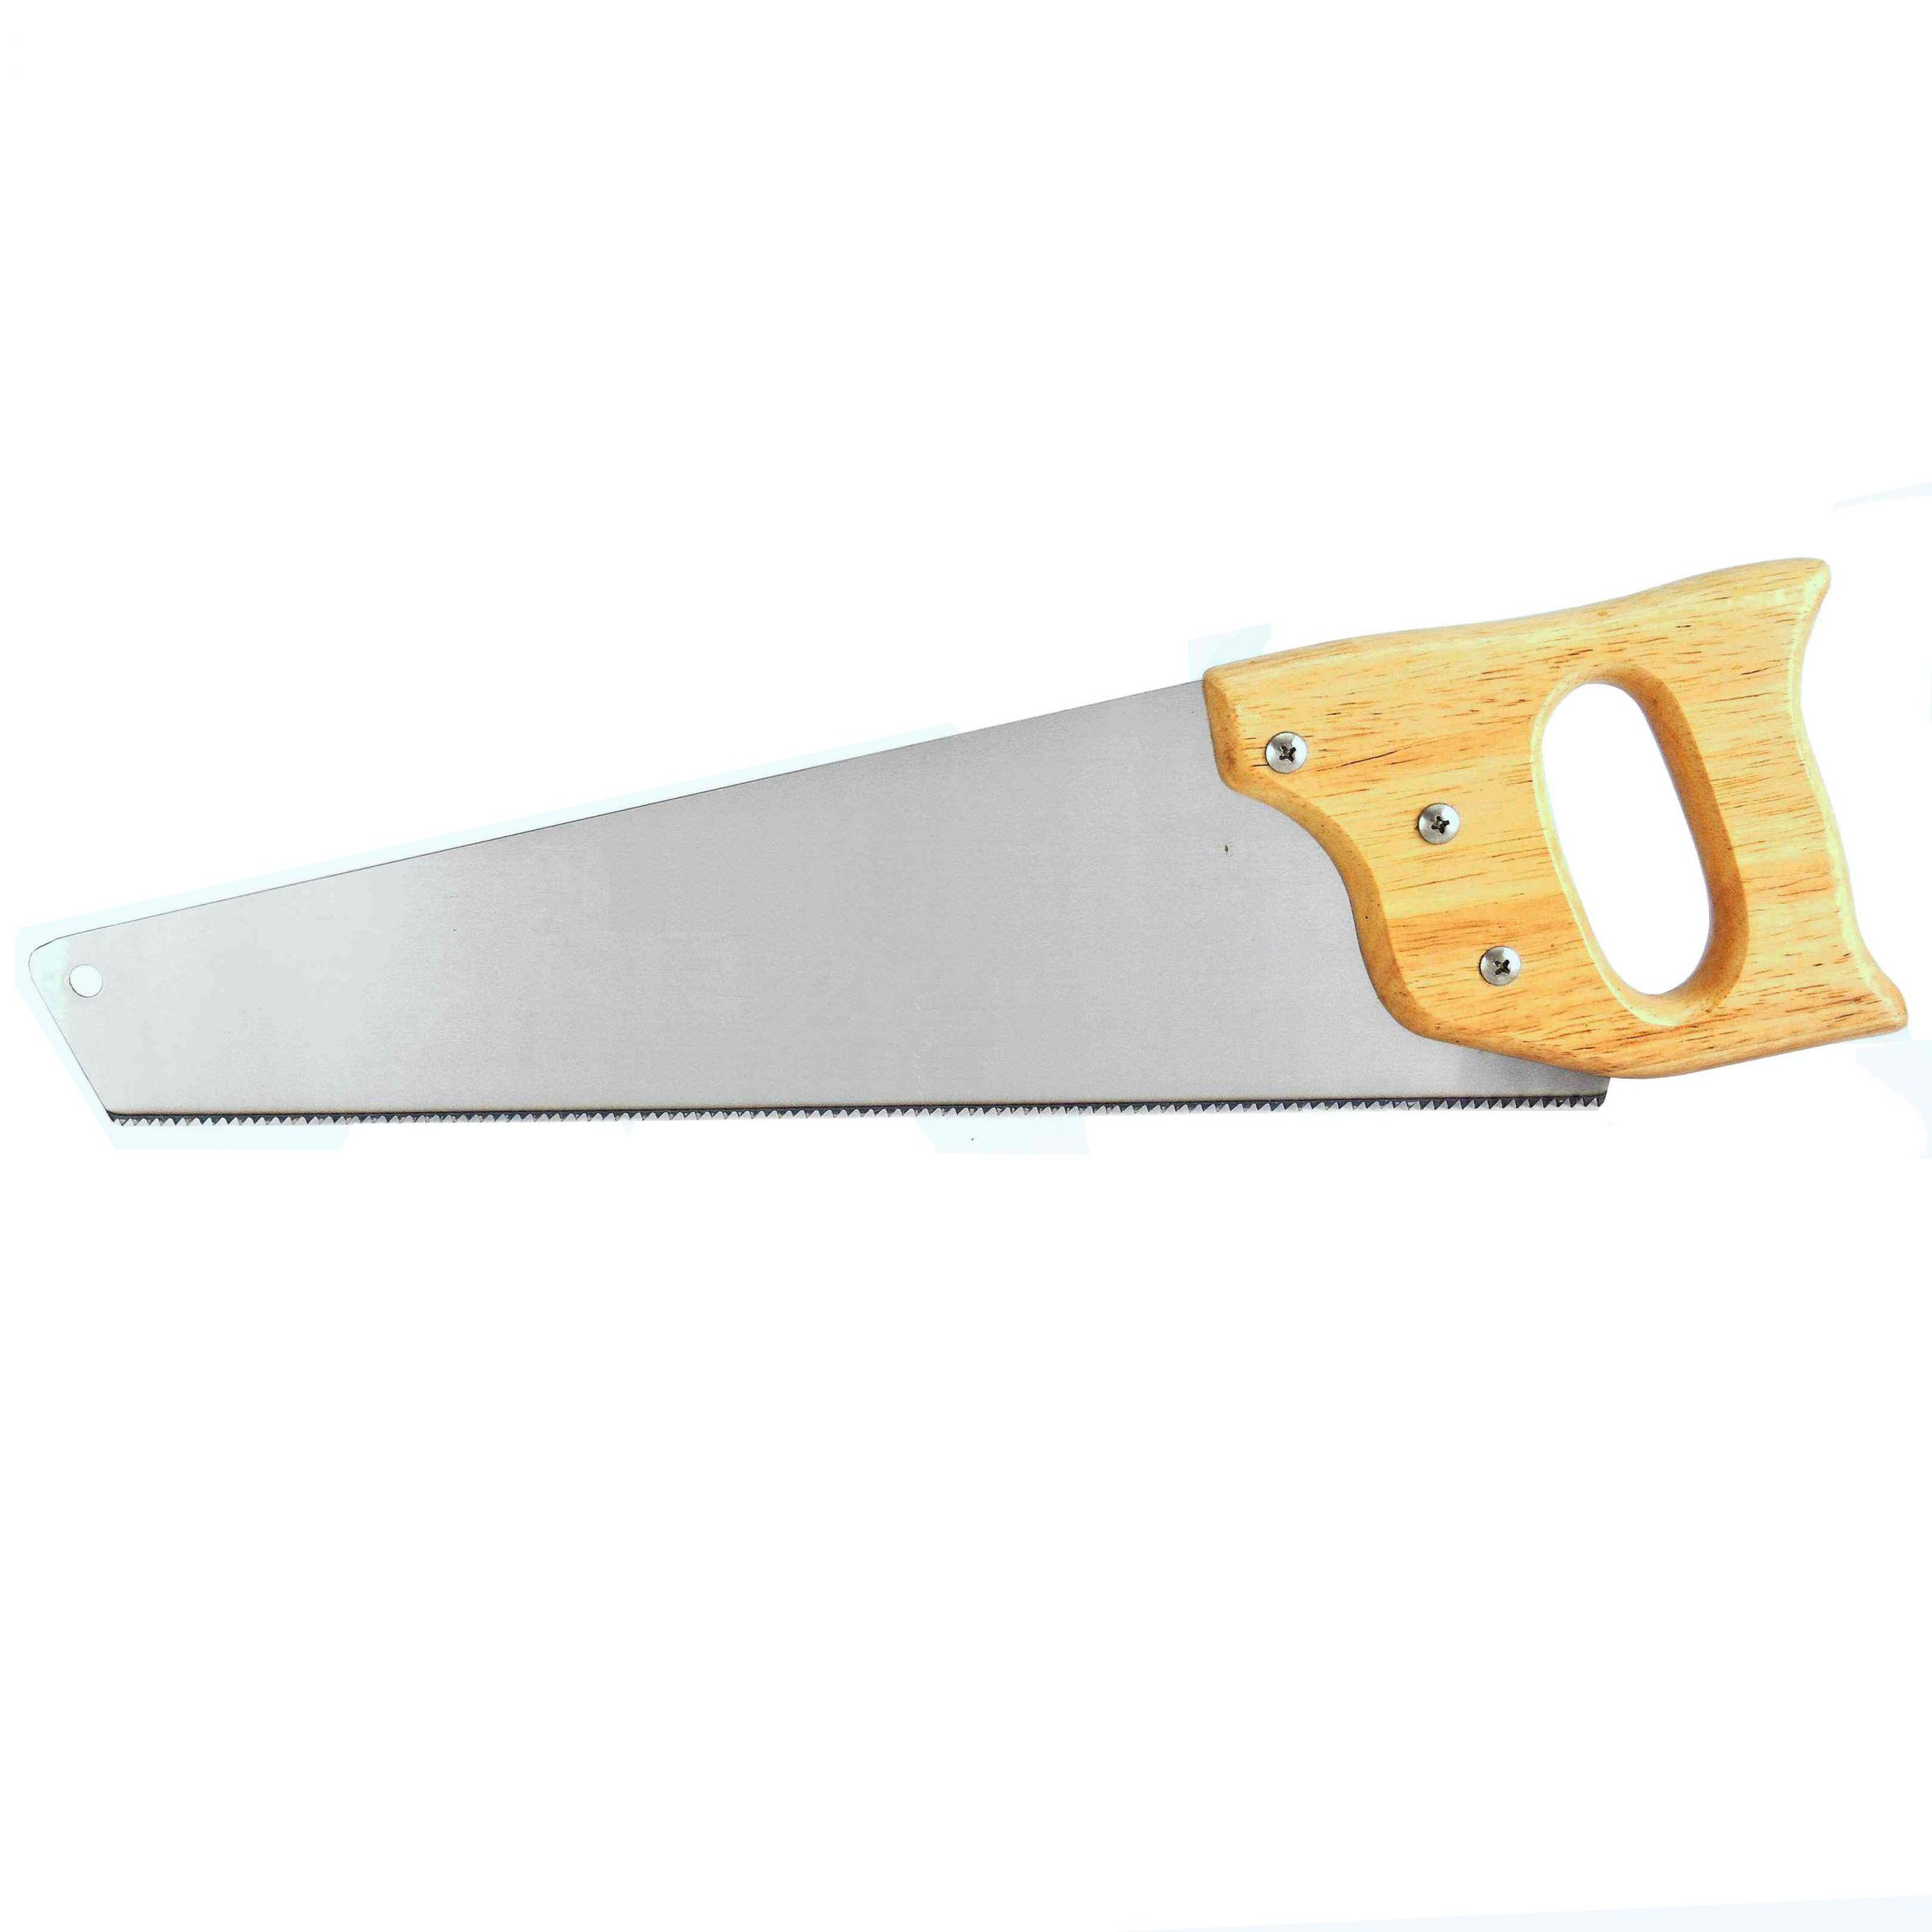 Hand Saw with Wooden Handle  Master Precision Cutting with